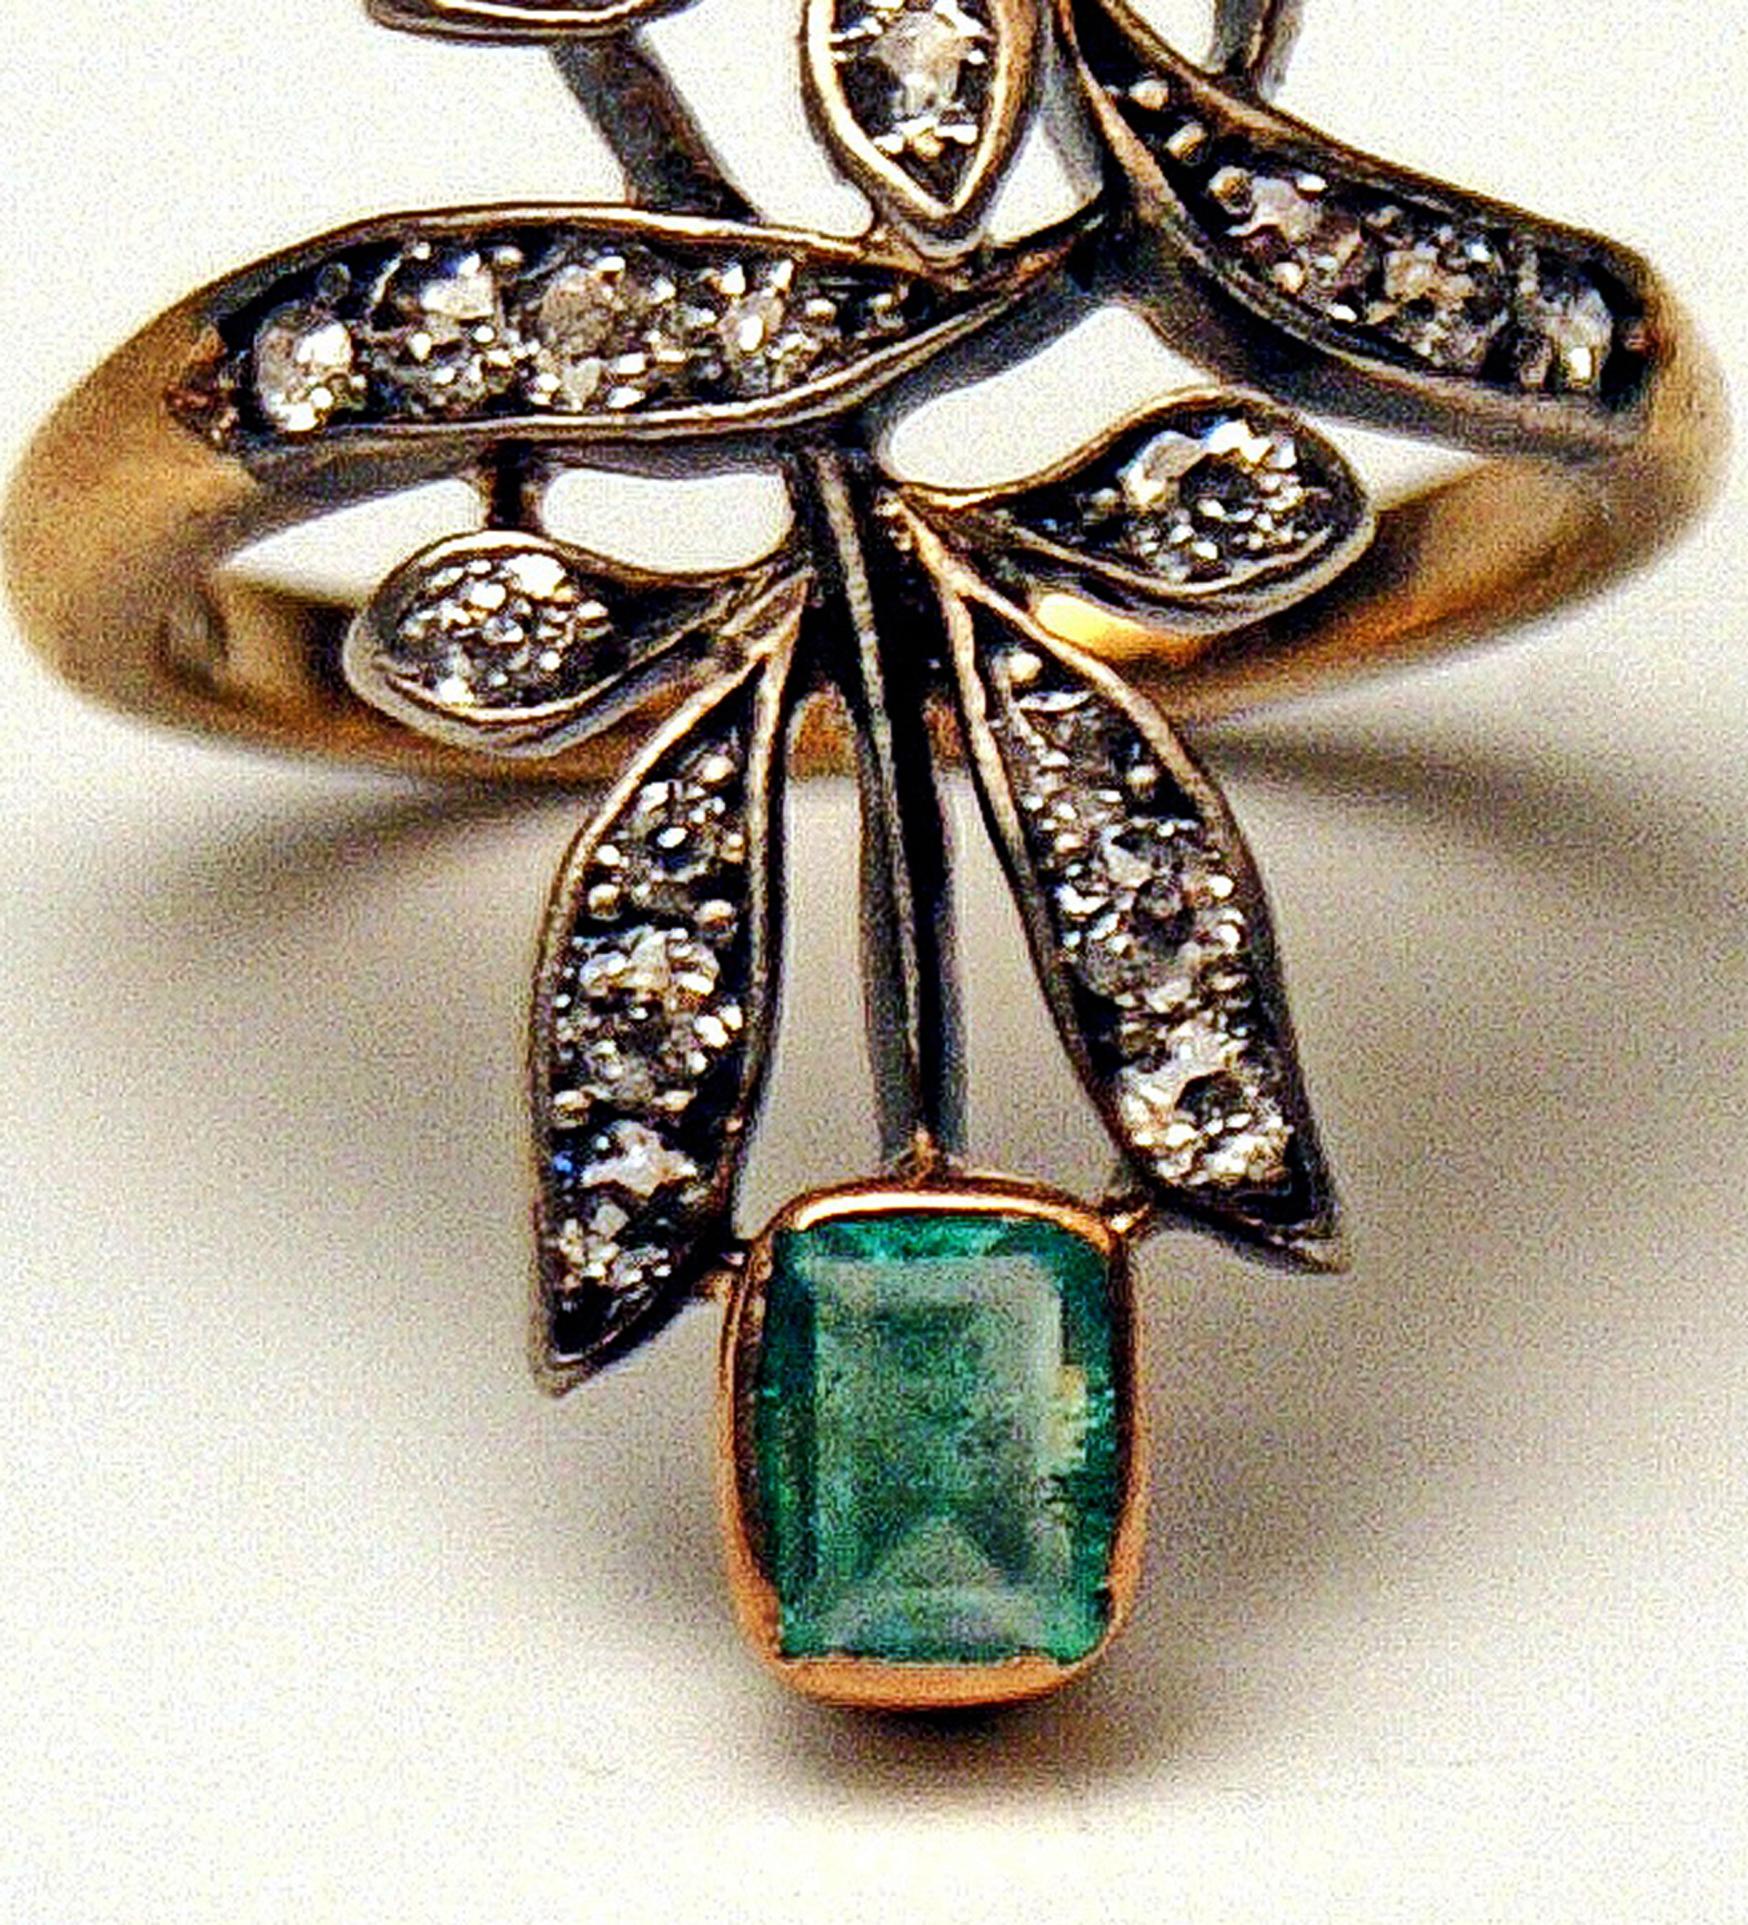 Golden Art Nouveau Ring of most elegant appearance with many diamonds attached in decorative manner so that impression of stylized leaves arises.   

GOLD  (14 ct  /  585)  /  DIAMONDS  (VINTAGE CUTS) / ONE EMERALD  & so-said SILBERFASSUNG  (=